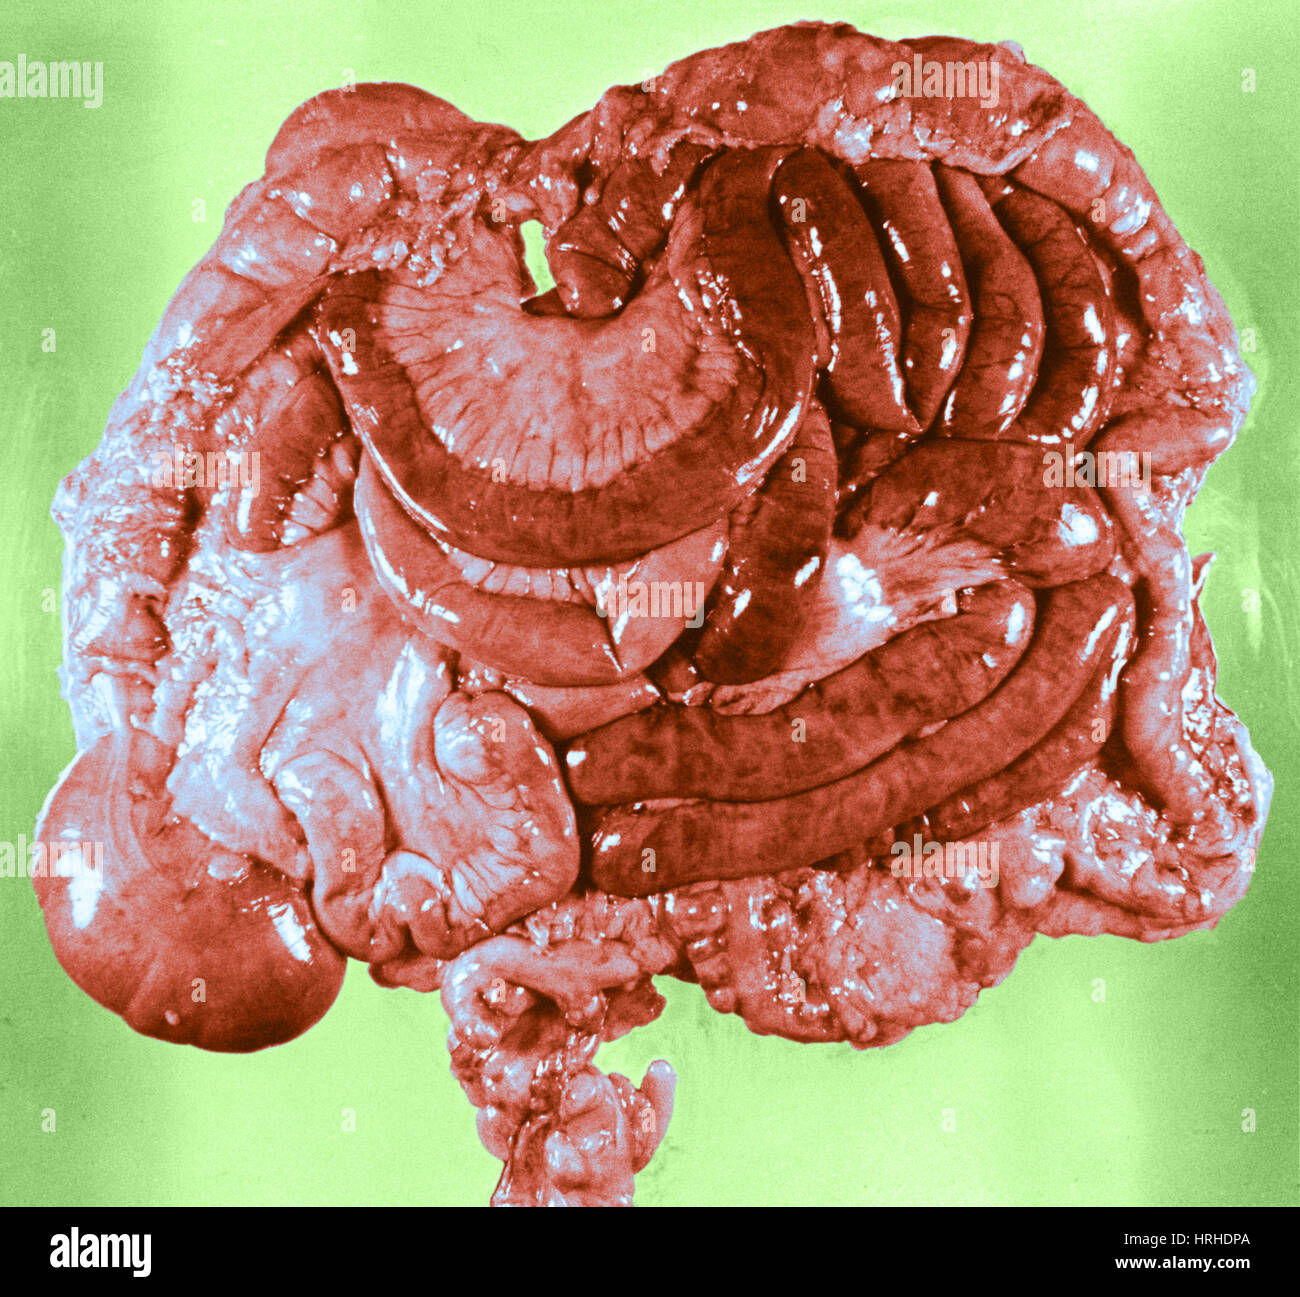 Mesentery High Resolution Stock Photography and Images - Alamy